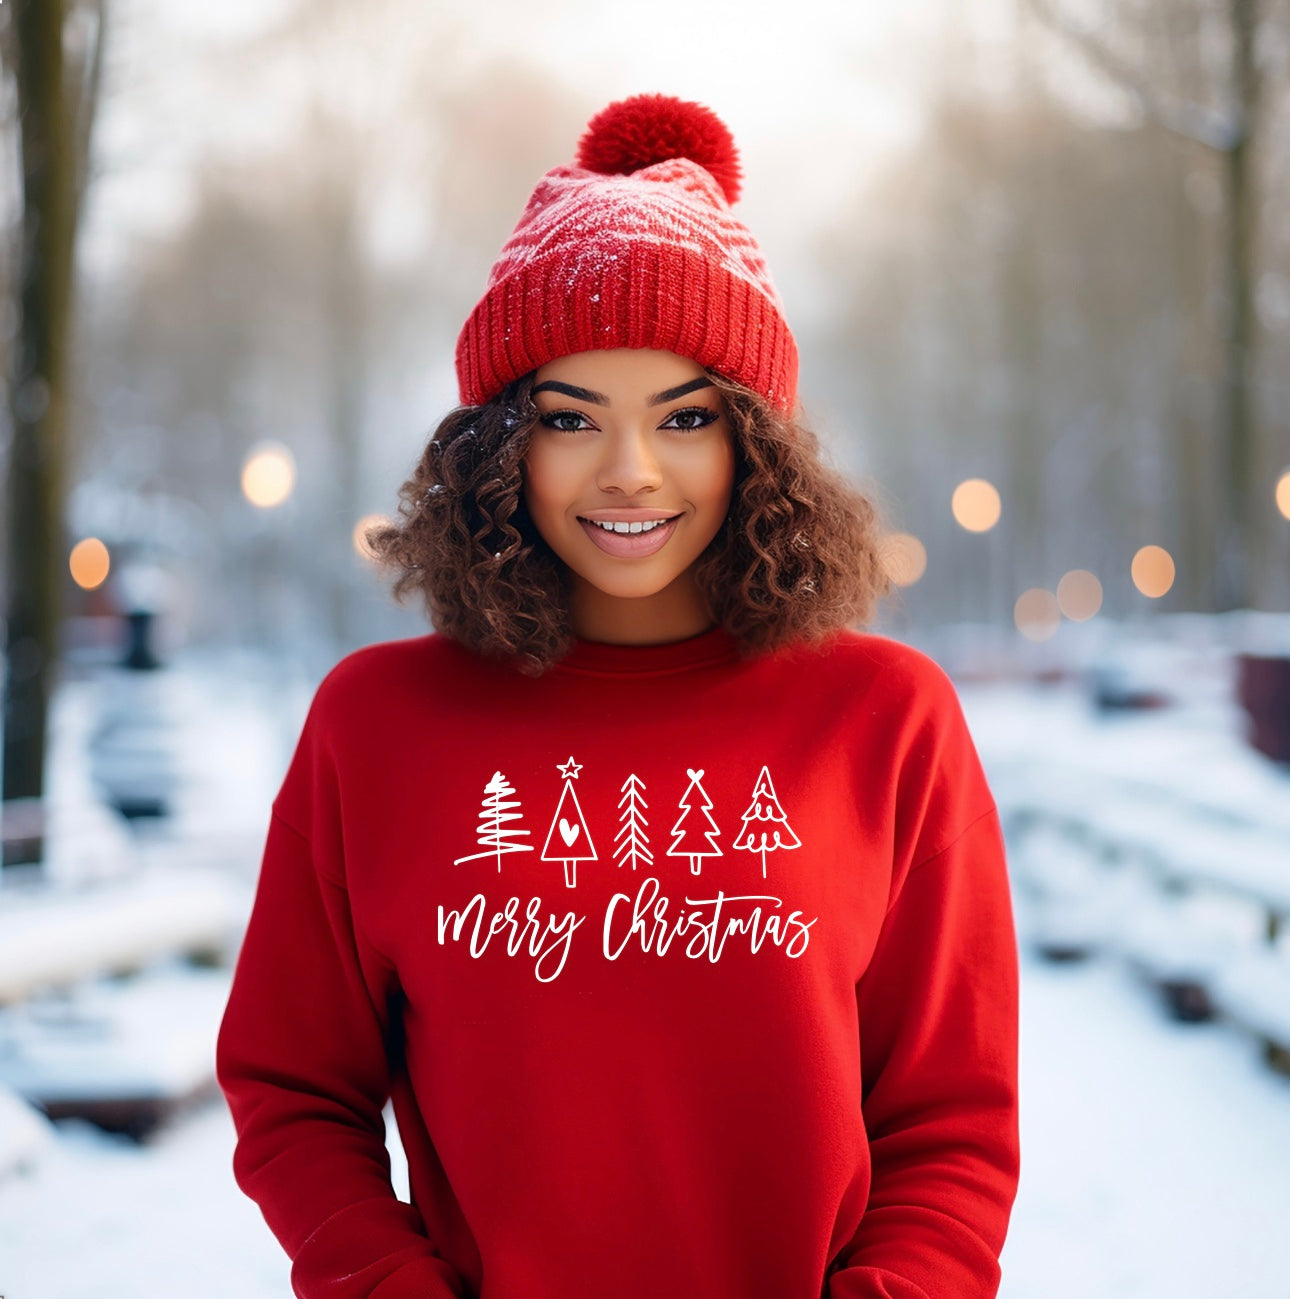 Merry Christmas crewneck sweatshirt with Christmas tree design for women in red